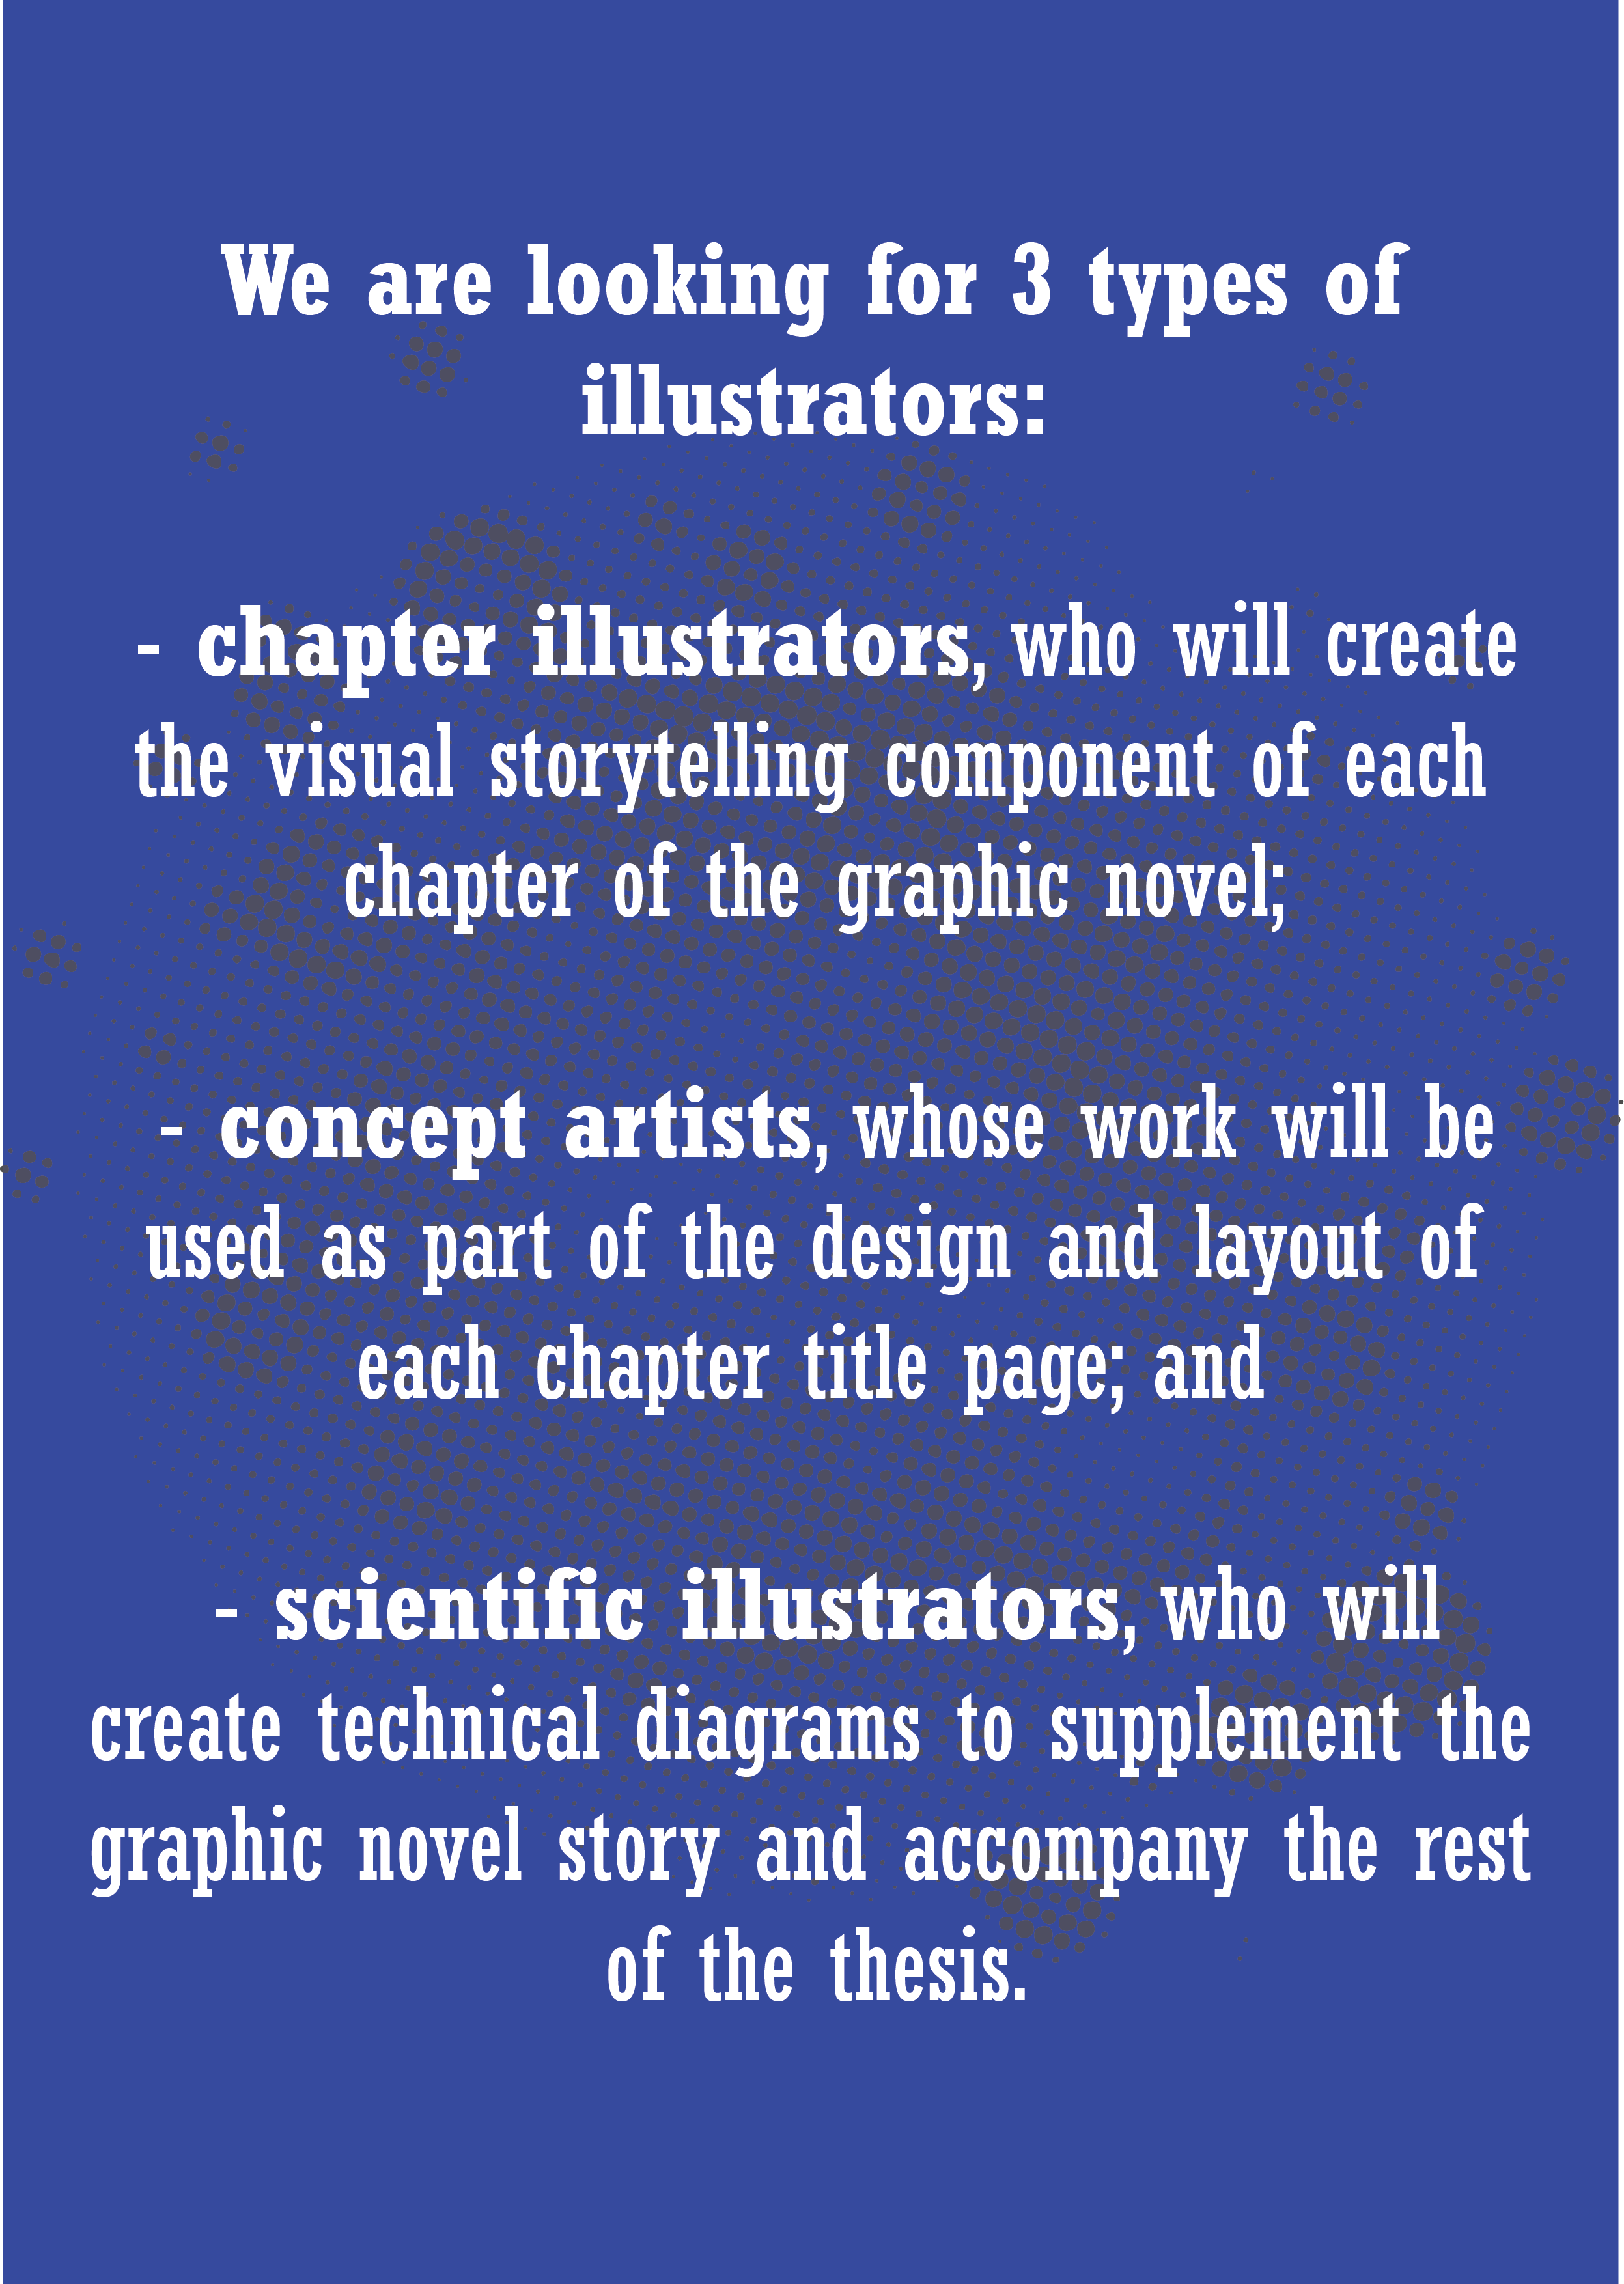 Call for Artists, flyer page 03